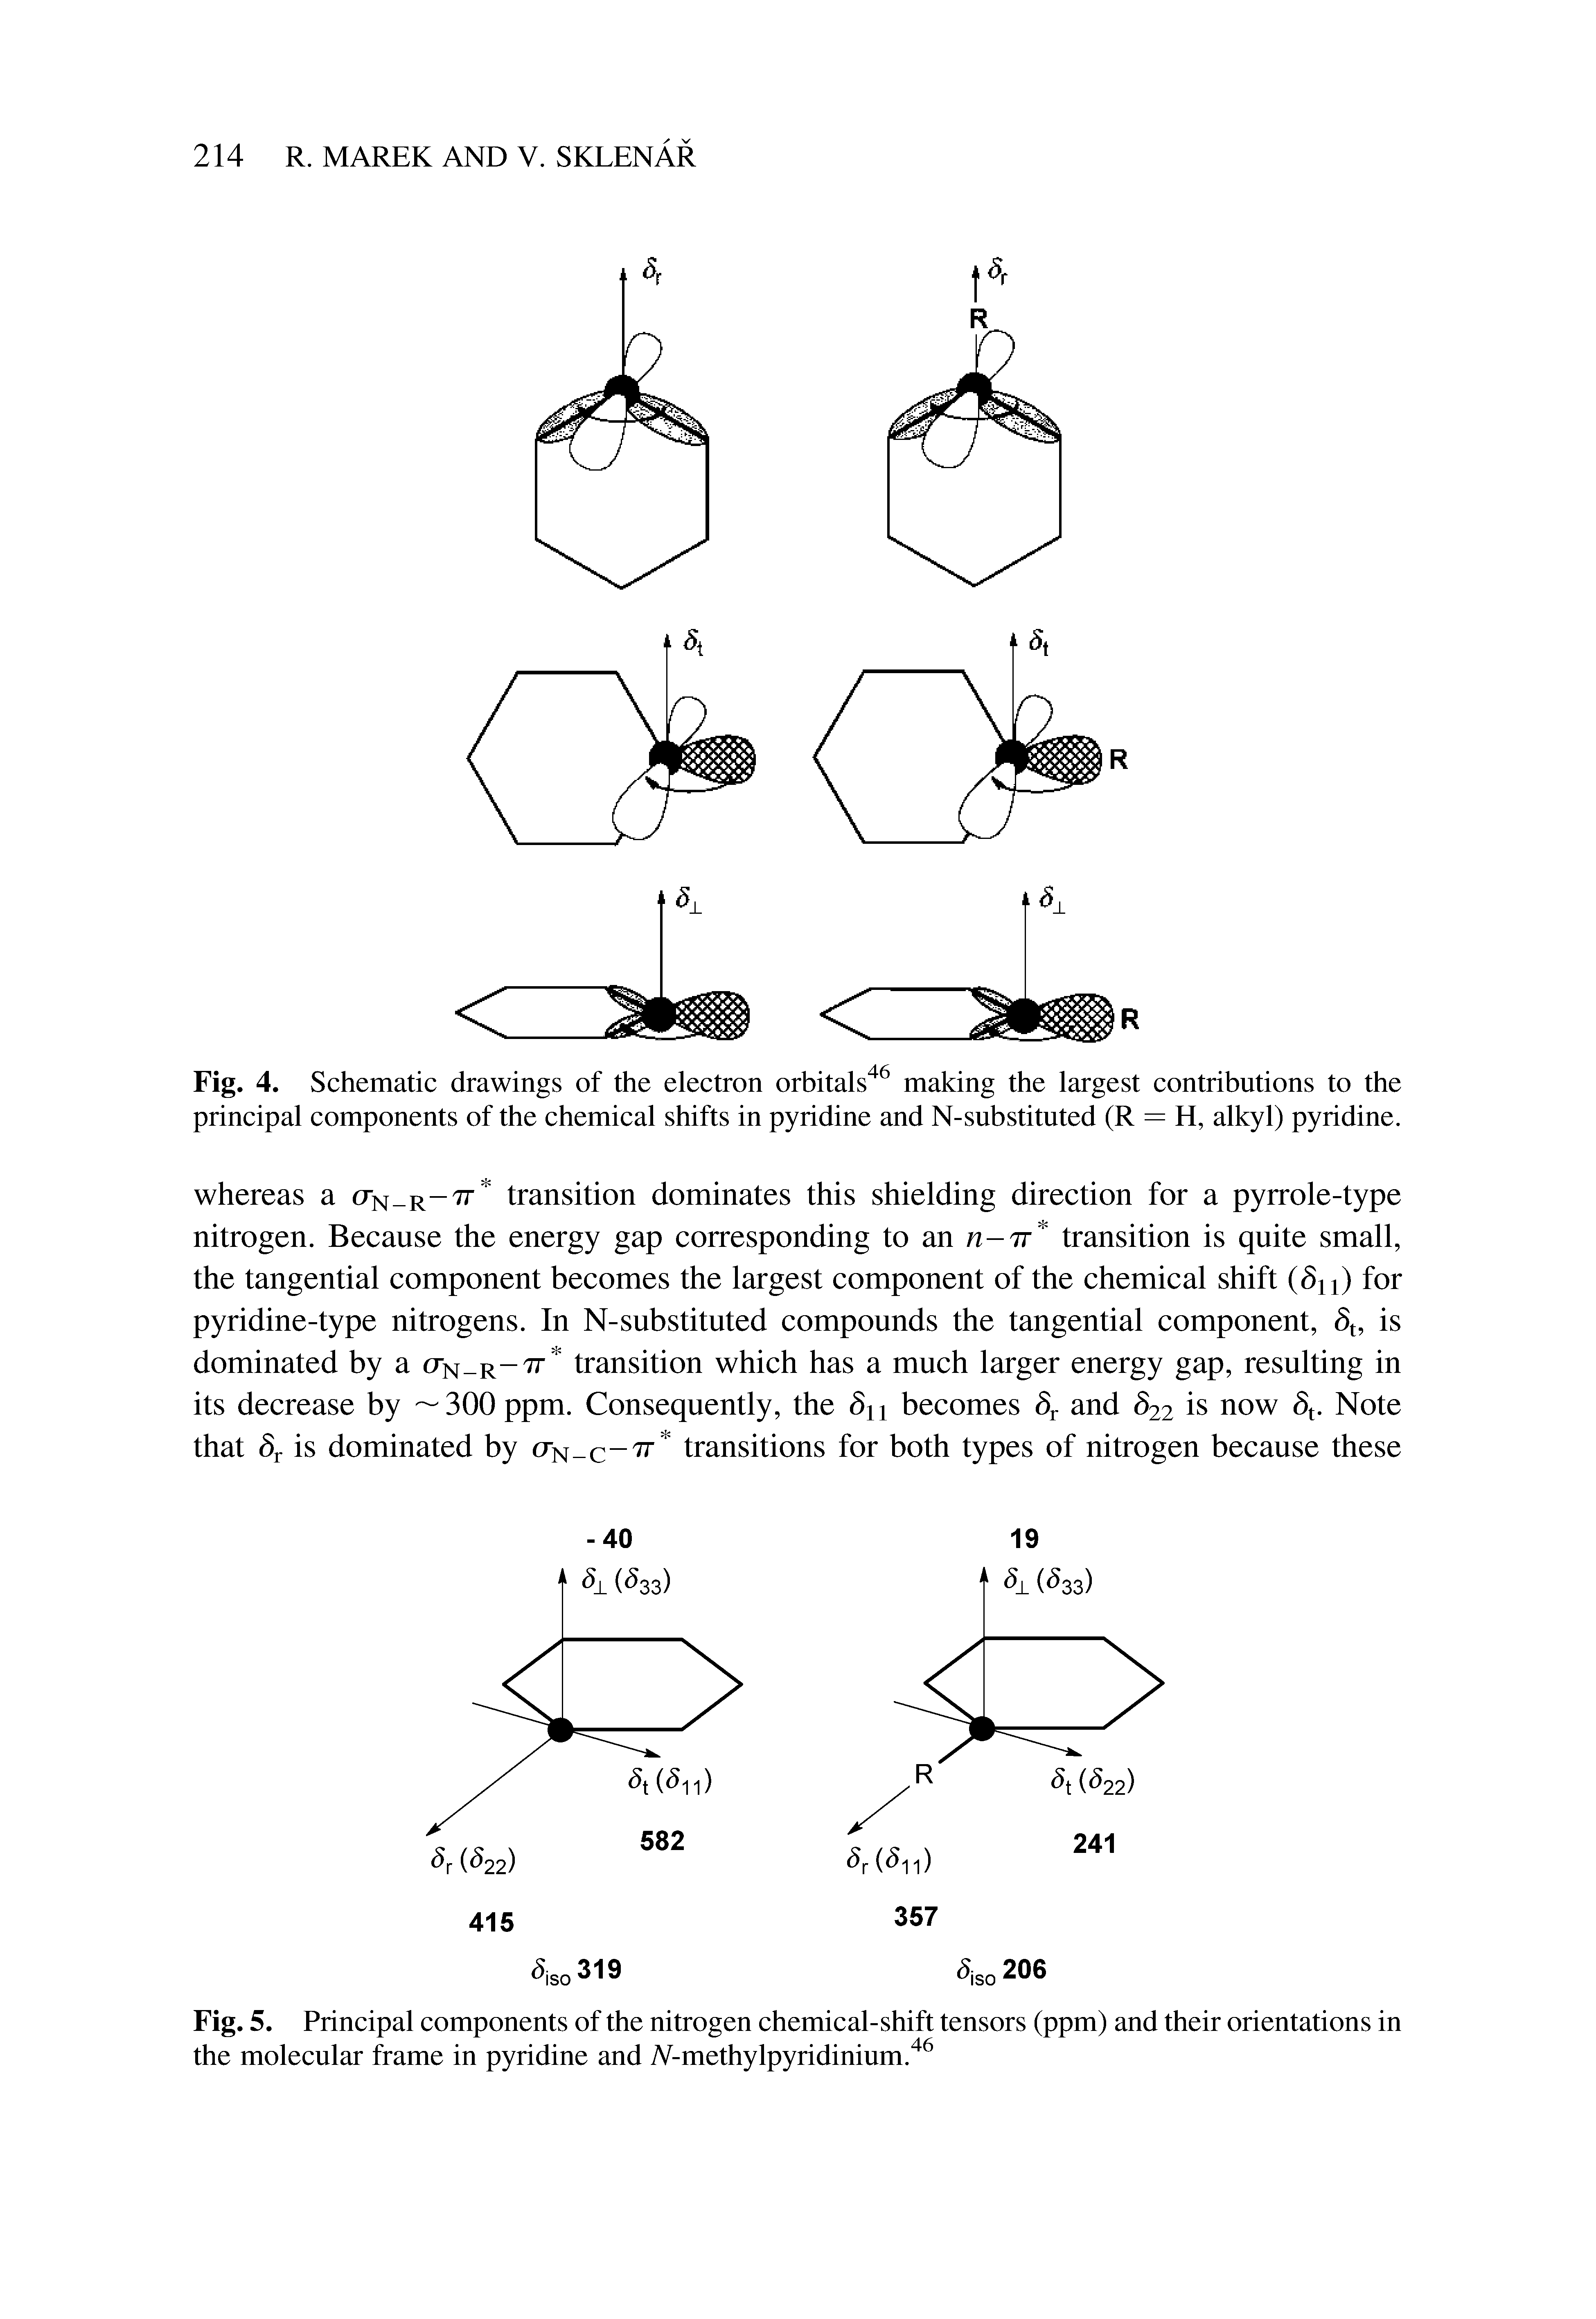 Fig. 4. Schematic drawings of the electron orbitals making the largest contributions to the principal components of the chemical shifts in pyridine and N-substituted (R = H, alkyl) pyridine.